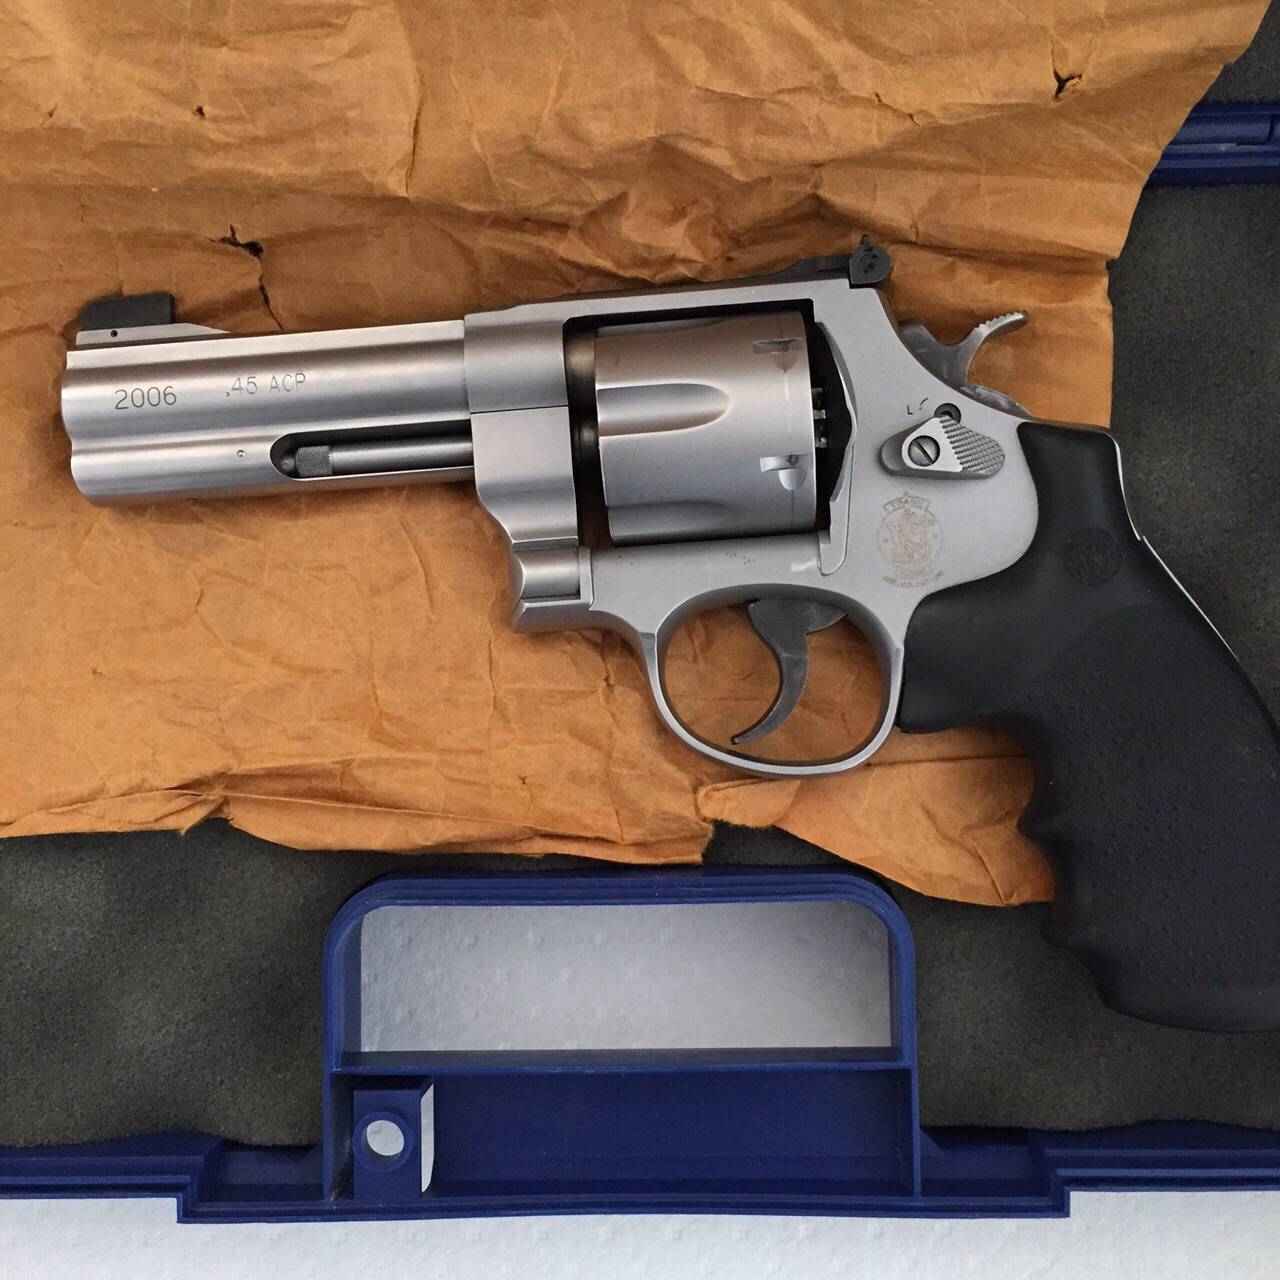 Smith & wesson 4500 pistol series